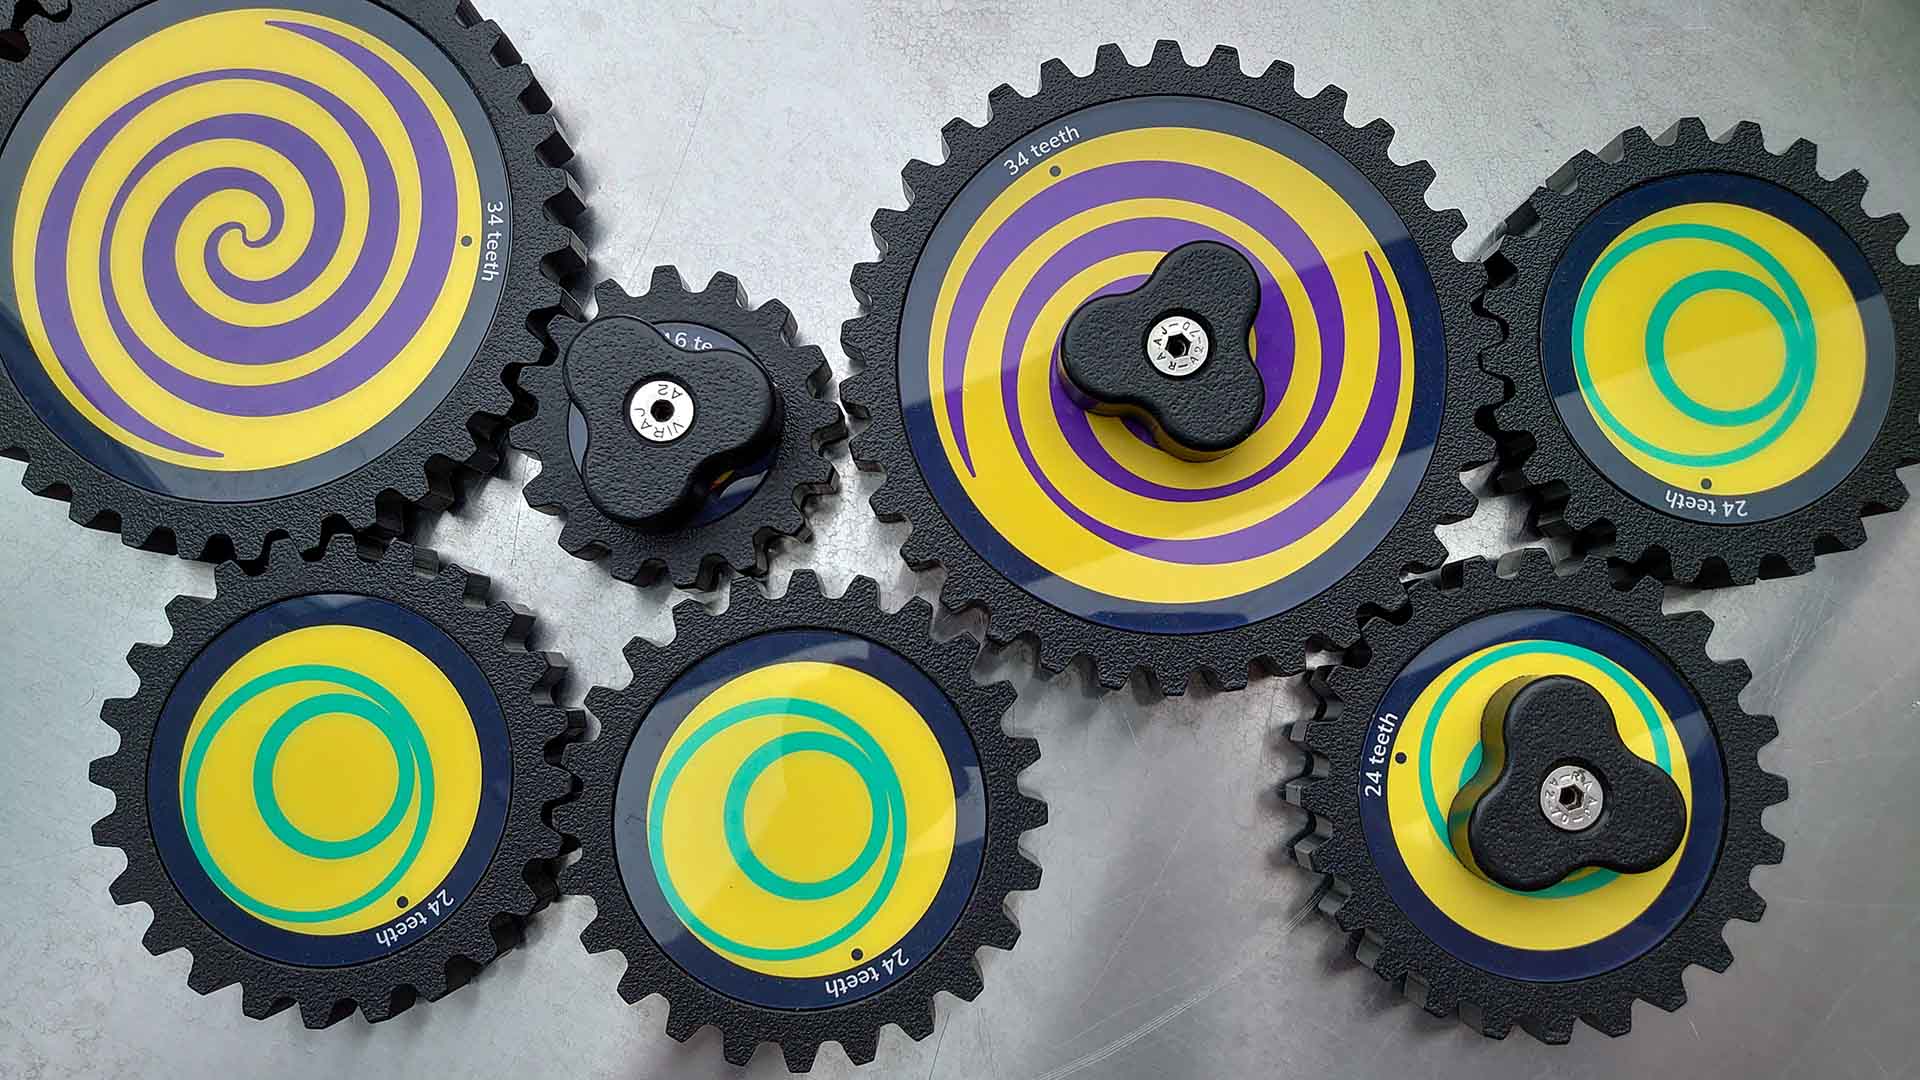 cogs assembled on a silver-coloured worktop